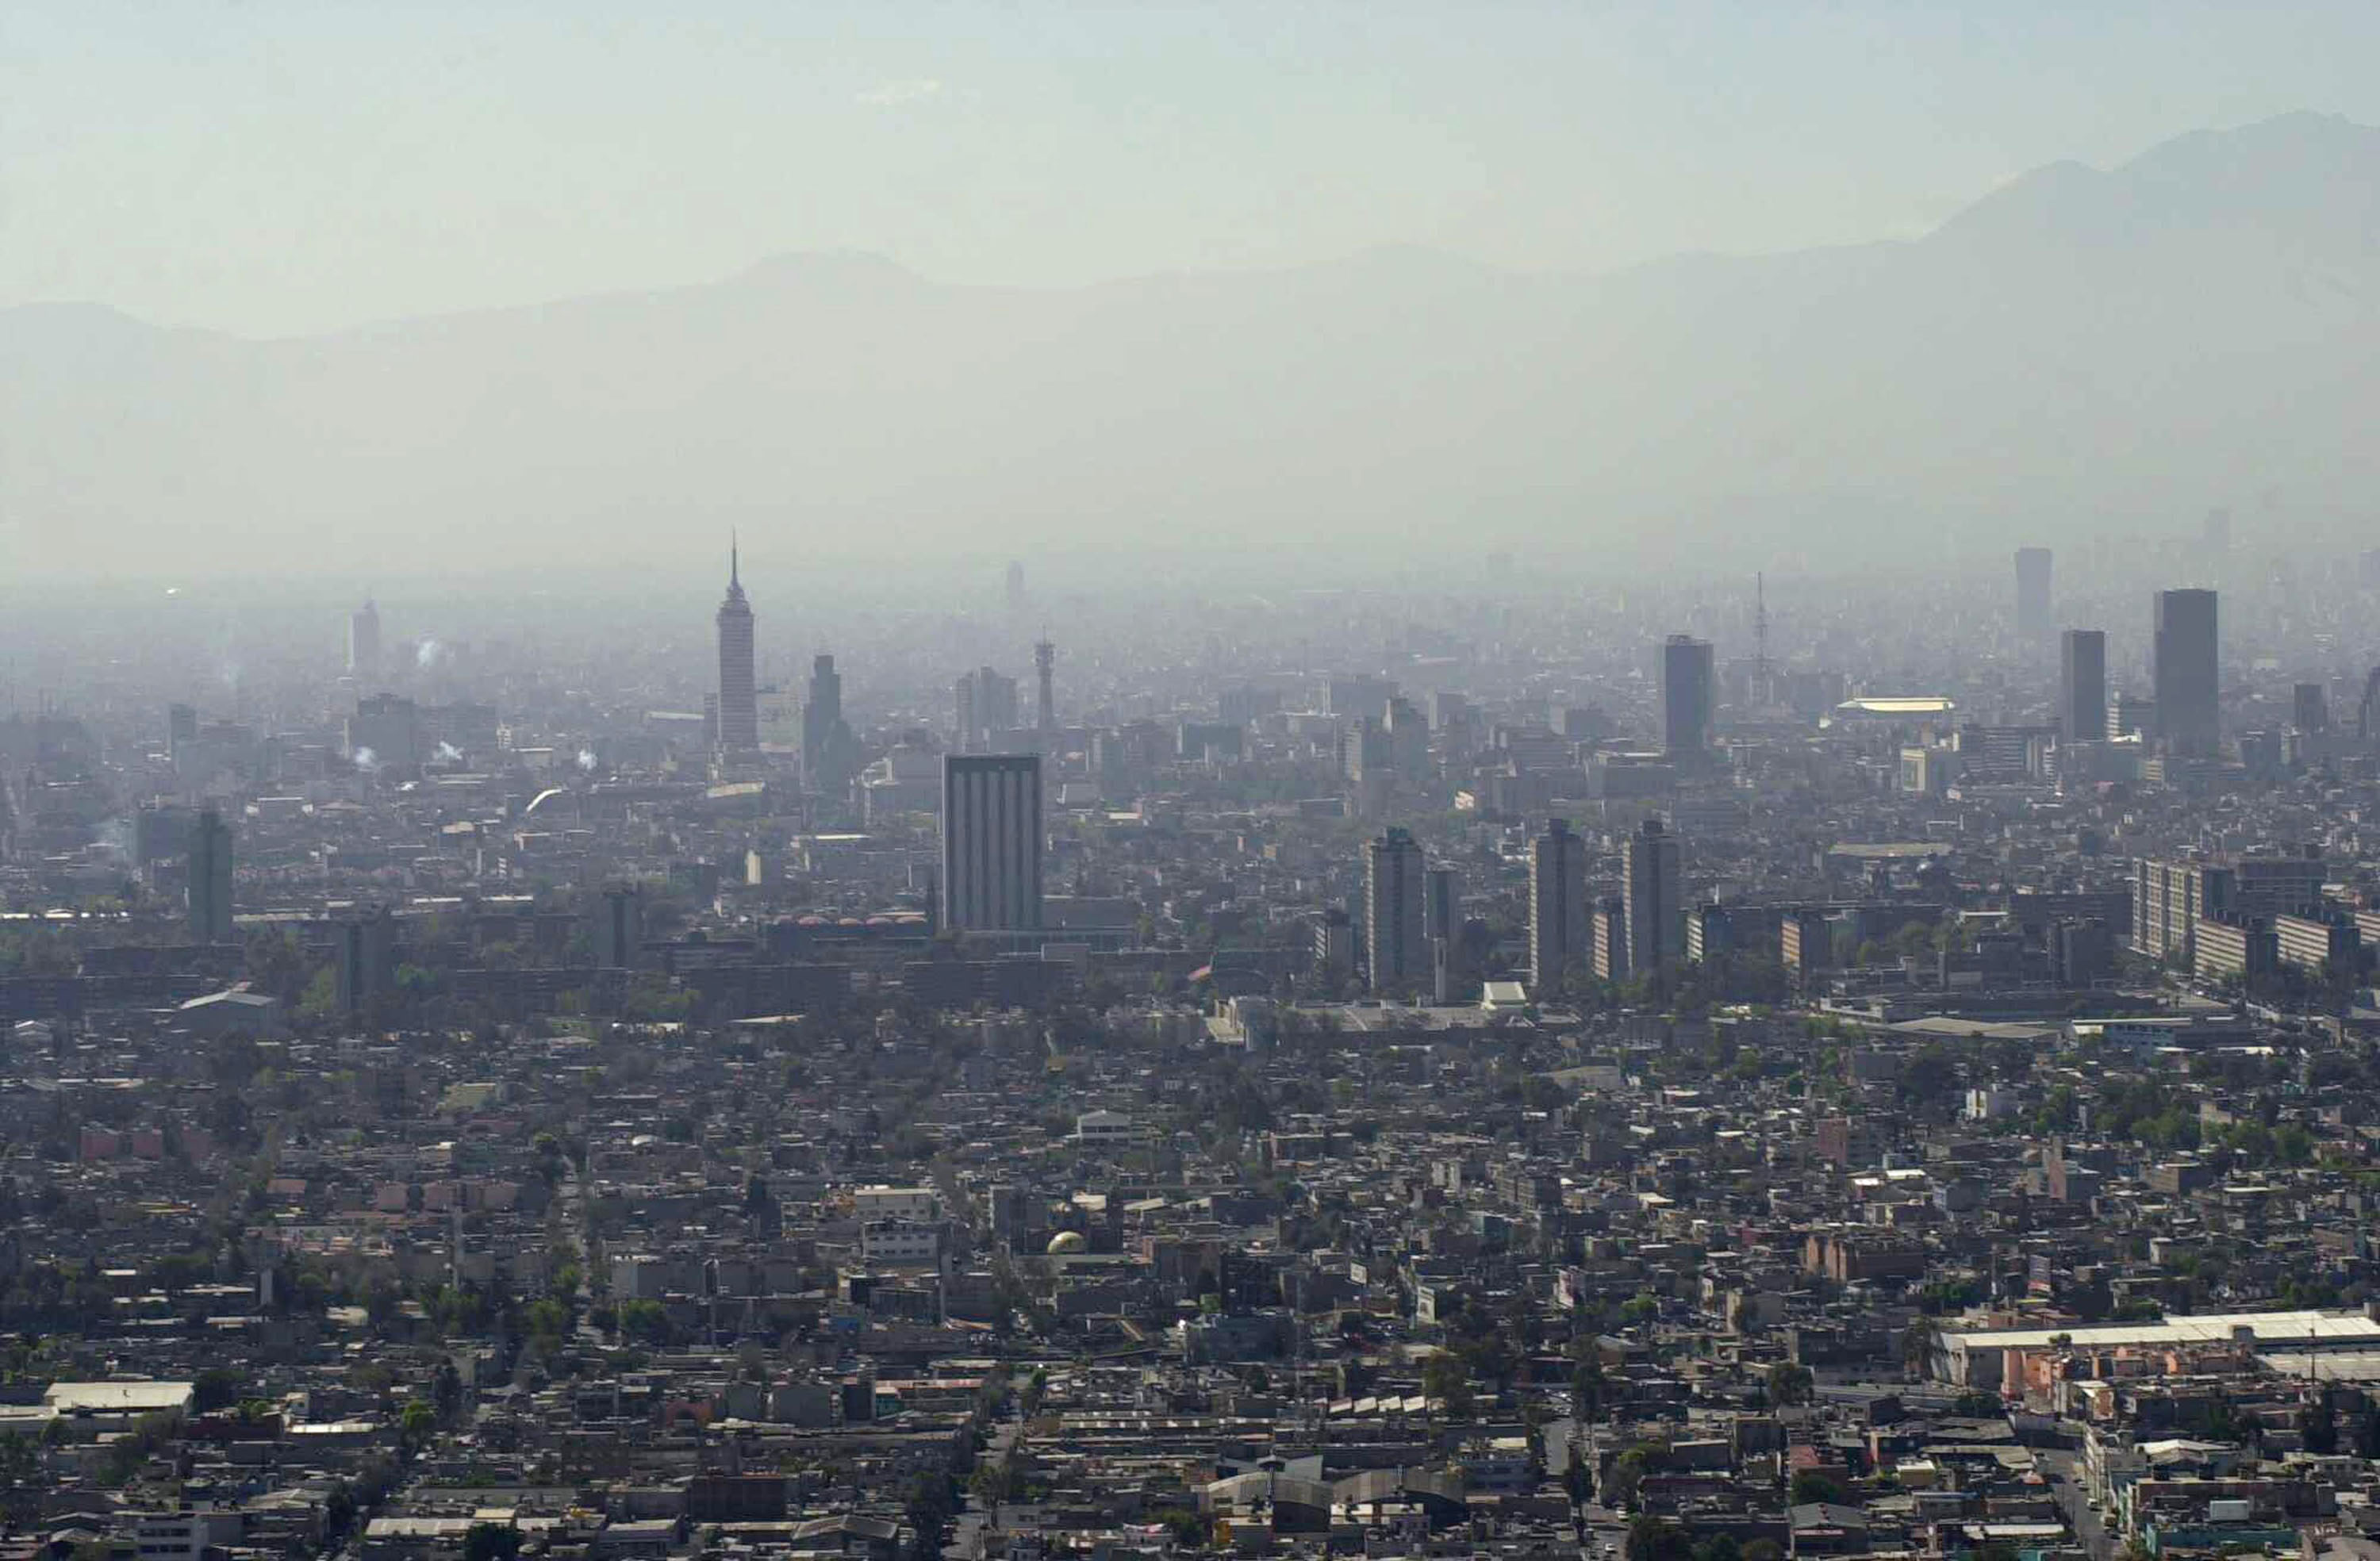 Mexico City is often covered in a hazy layer of smog.